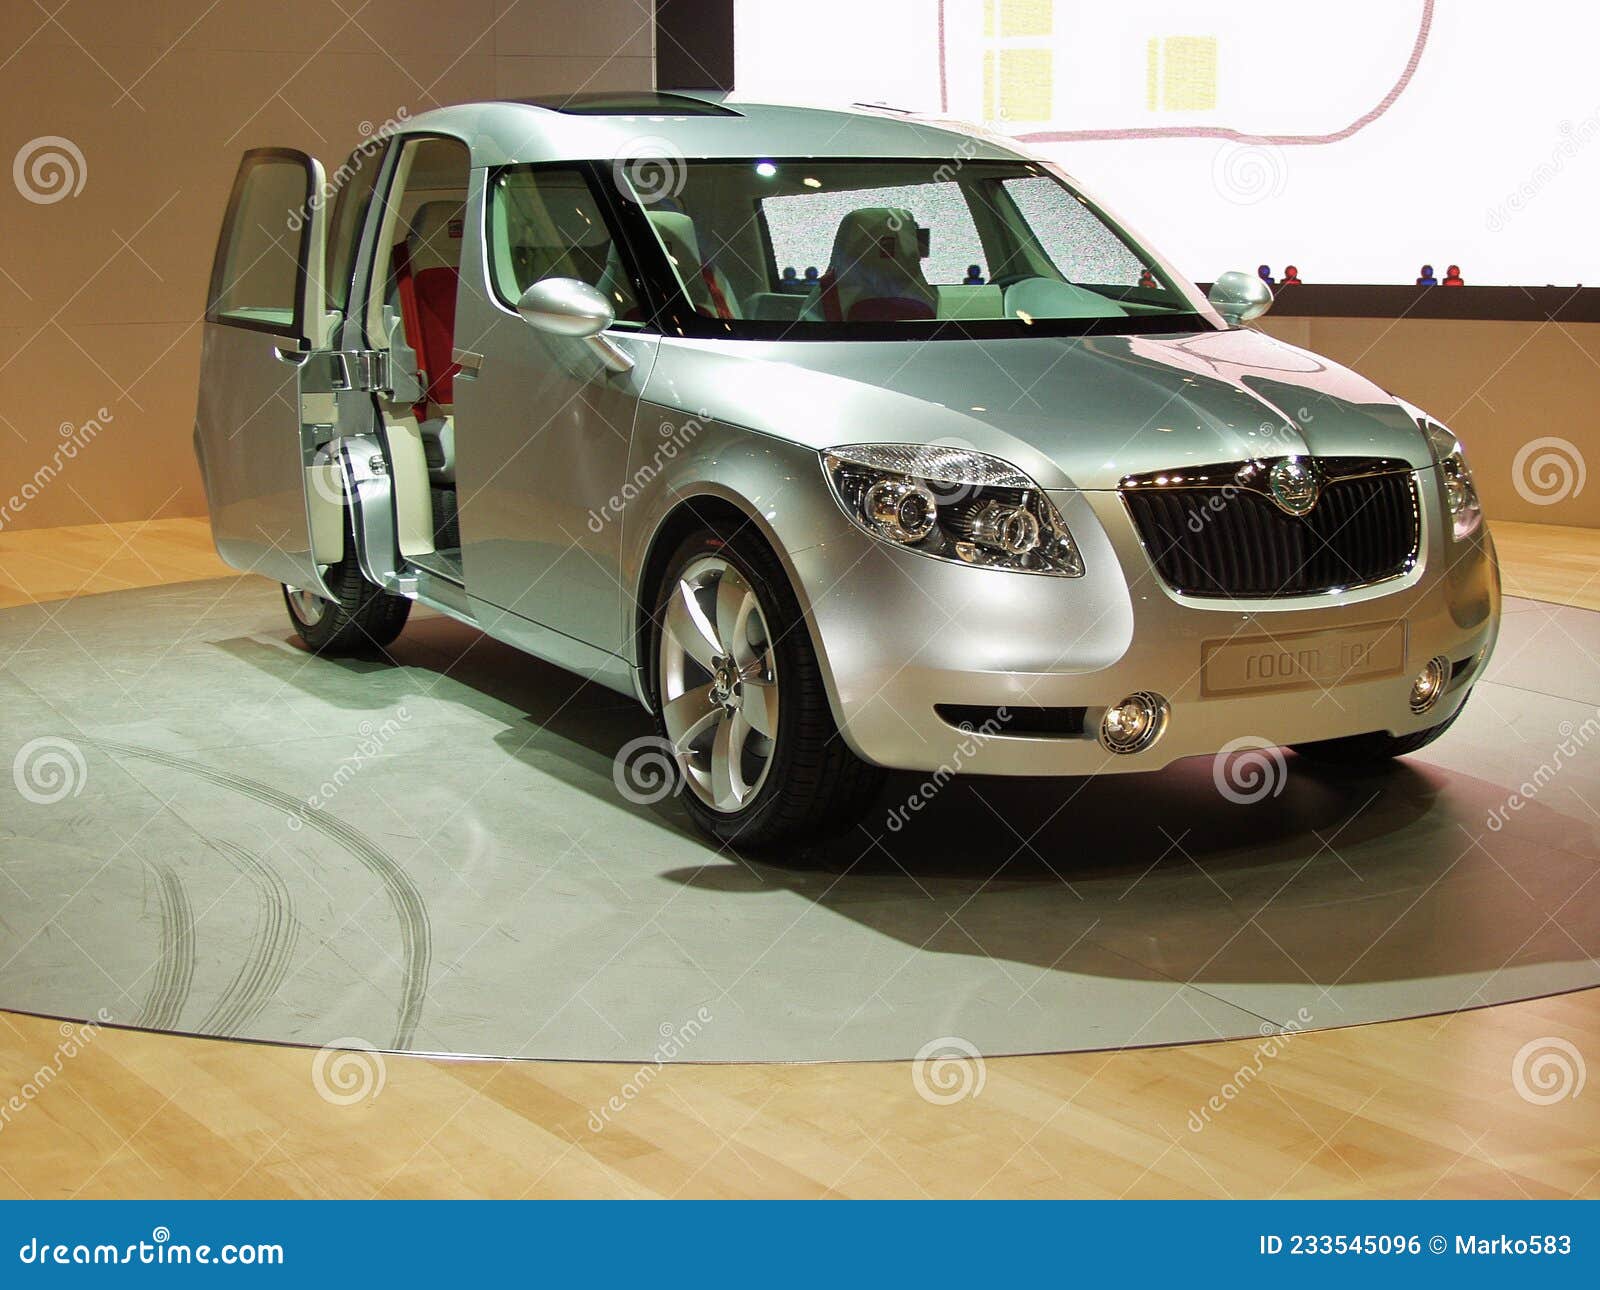 Skoda Roomster Concept (2003) - pictures, information & specs